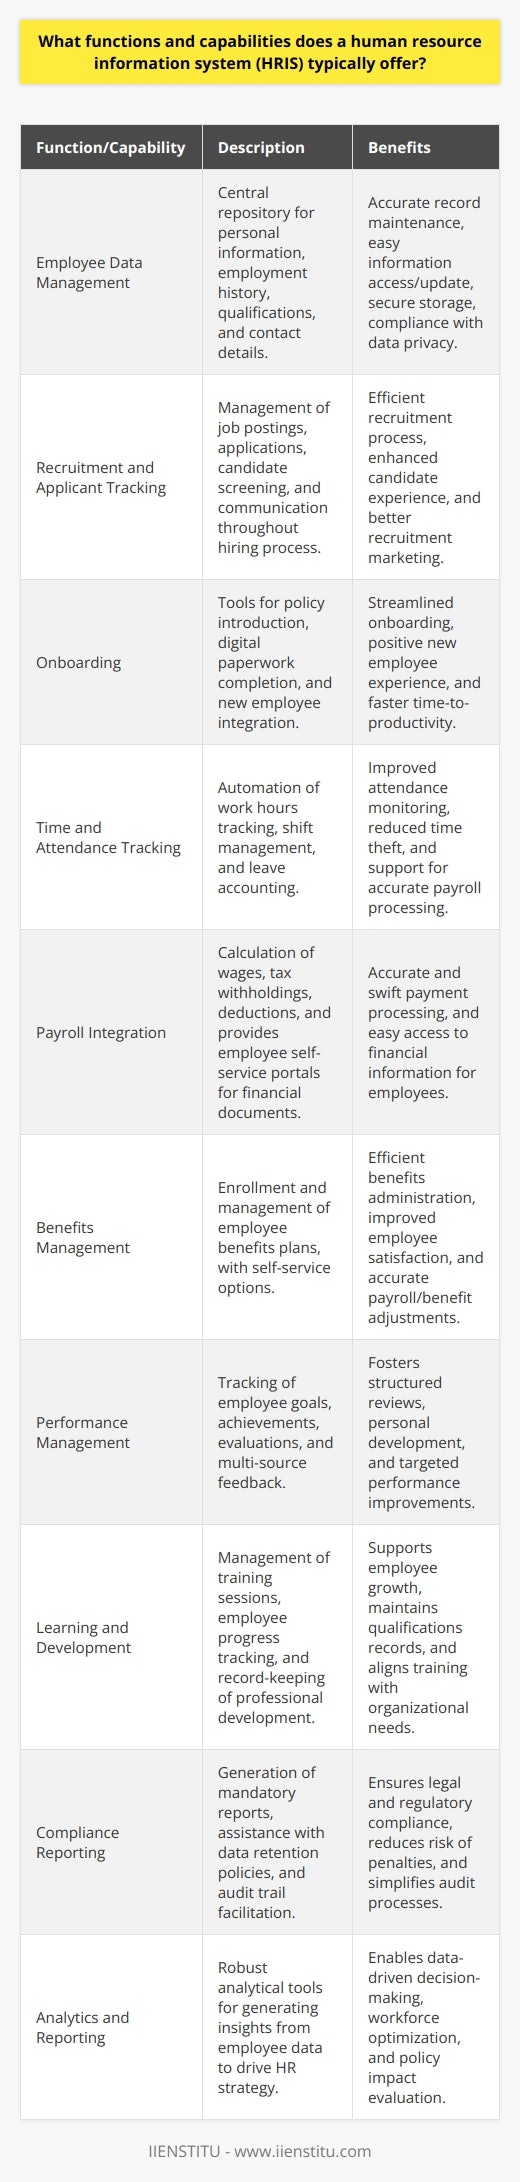 A Human Resource Information System (HRIS) is an integral tool designed to support a wide array of human resources (HR) functions within an organization. The primary role of an HRIS is to collect, store, process, manage, and disseminate employee-related information, ensuring HR departments operate efficiently and effectively. Here is an exploration of some of the key functions and capabilities typically offered by an HRIS.**Employee Data Management:**The HRIS serves as a central repository for employee data, such as personal information, employment history, qualifications, and contact details. It allows HR personnel to maintain accurate records and easily access and update information as needed. The HRIS also provides secure storage and assists with data privacy compliance.**Recruitment and Applicant Tracking:**Many HRIS platforms are equipped with recruitment and applicant tracking capabilities. These features help HR staff manage job postings, collect and sort applications, screen candidates, and support communication through the hiring process. Advanced systems might also support recruitment marketing and candidate relationship management.**Onboarding:**After successful recruitment, HRIS helps streamline the onboarding process. It provides tools to introduce new employees to company policies, fill out necessary paperwork digitally, and integrate them into the company's environment, helping to start their journeys on a positive note.**Time and Attendance Tracking:**Tracking work hours, managing shift patterns, and accounting for various types of leave are essential HR tasks that an HRIS can automate. The system typically integrates with timekeeping devices and allows HR and management to monitor attendance, reduce time theft, and support accurate payroll processing.**Payroll Integration:**A robust HRIS often includes payroll features or integrates seamlessly with payroll software. This supports the calculation of wages, tax withholdings, and other deductions, enabling swift and accurate employee payment. Additionally, it often offers self-service portals for employees to access payslips and tax documents.**Benefits Management:**HRIS platforms are instrumental in administering employee benefits, such as health insurance, retirement savings plans, and other perks. These systems allow for enrollment and management of the various plans, give employees self-service options to select their benefits, and ensure that changes due to life events are accurately reflected in payroll deductions and coverage levels.**Performance Management:**The HRIS can facilitate performance appraisals by allowing managers and HR to track employee goals, achievements, and evaluation processes. These systems provide tools to structure reviews, gather multi-source feedback, and assist in the personal development planning of staff members.**Learning and Development:**Many HRIS systems include modules for managing learning and professional development activities. HR can use these functions to organize training sessions, track employee progress, and maintain records of certifications and qualifications obtained through professional development activities.**Compliance Reporting:**HRIS plays a critical role in maintaining legal compliance. It can generate required reports such as EEO-1, /1 1/ and ACA, and it assists with data retention policies and audit trails to facilitate legal and regulatory reporting.**Analytics and Reporting:**HRIS provides HR managers and executives with robust reporting and analytical tools to create meaningful insights from employee data. Insights can drive HR strategy, such as identifying turnover trends, forecasting workforce needs, or understanding the impact of certain HR policies.Through these functions and capabilities, HRIS platforms empower HR professionals to focus on strategic activities by automating administrative tasks and providing a comprehensive view of workforce-related data. By leveraging technology, organizations can ensure efficient and accurate management of human resources, underpinning the broader objectives of the company.